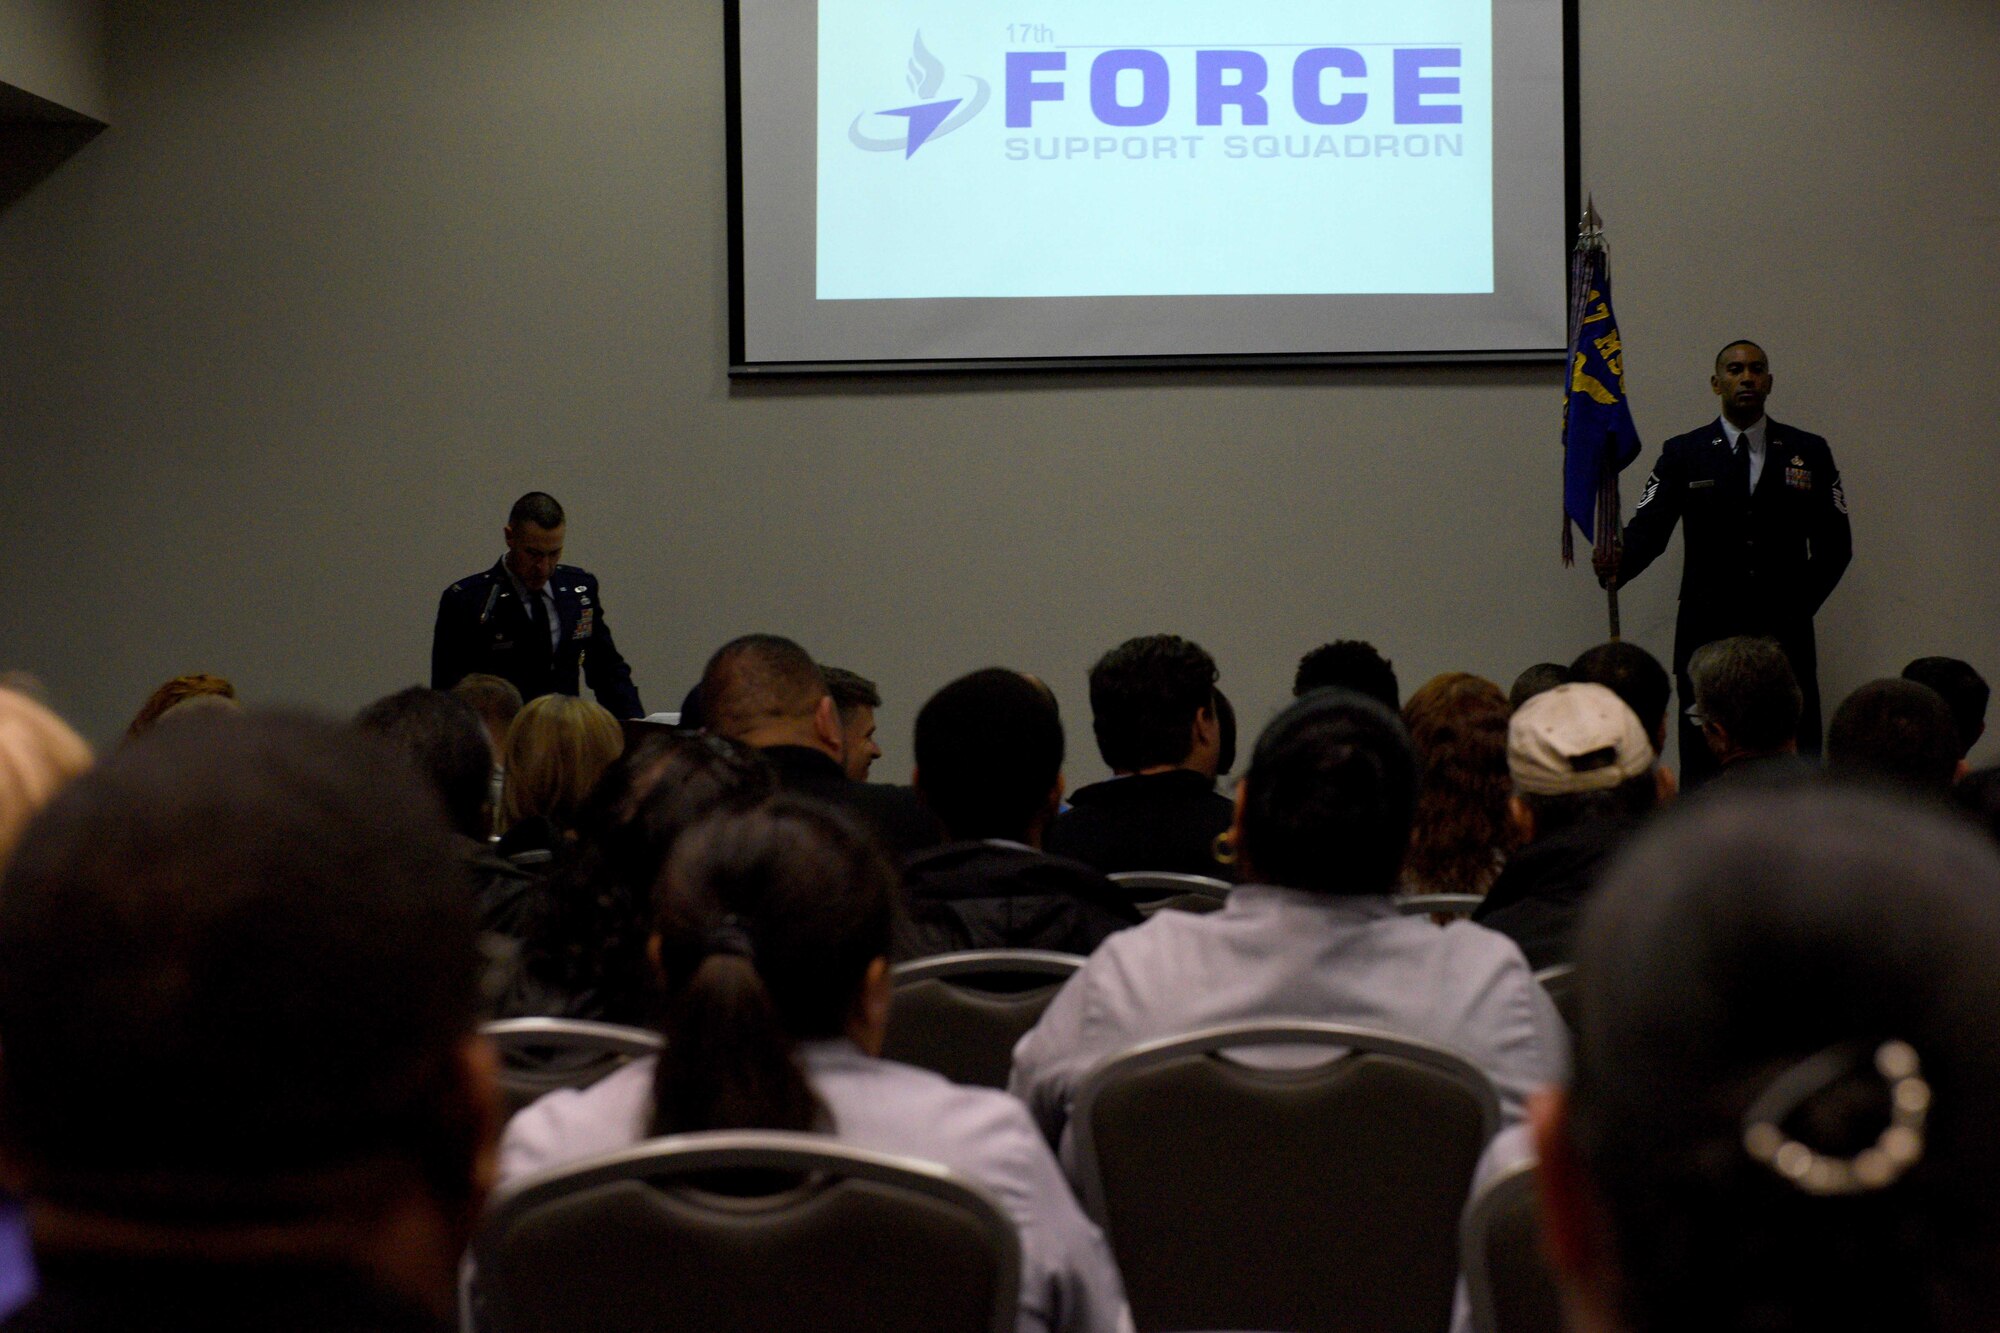 U.S. Air Force Col. Jason Beck, 17th Mission Support Group commander, speaks during the 17th Force Support Squadron assumption of leadership at the Event Center on Goodfellow Air Force Base, Texas, October 19, 2018. Beck welcomed 17th FSS incoming Director, William Dowell.  (U.S. Air Force photo by Senior Airman Randall Moose/Released)